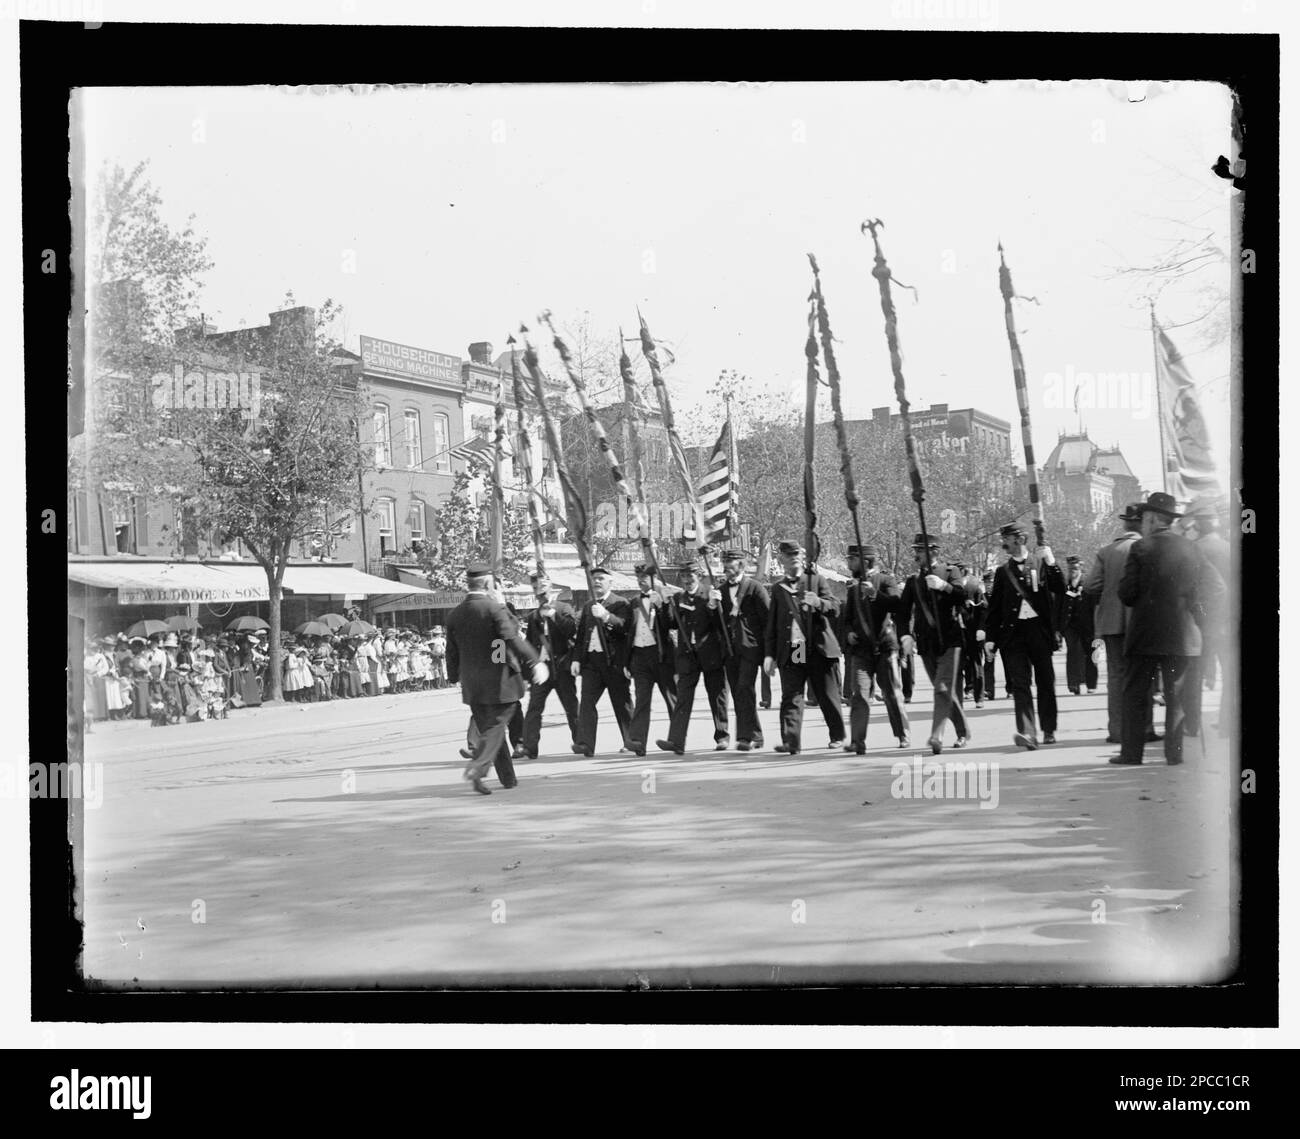 A post from Trenton, N.J., with tattered battle flags. The 36th National Encampment of the G.A.R, Wash, D.C. Oct. 5-11, 1902, no. 16. Grand Army of the Republic, National Encampment, (36th :, 1902 :, Washington, D.C.) , United States, History, Civil War, 1861-1865, Veterans, Commemorations, Washington (D.C.), 1900-1910, Military parades & ceremonies, Washington (D.C.), 1900-1910. Stock Photo